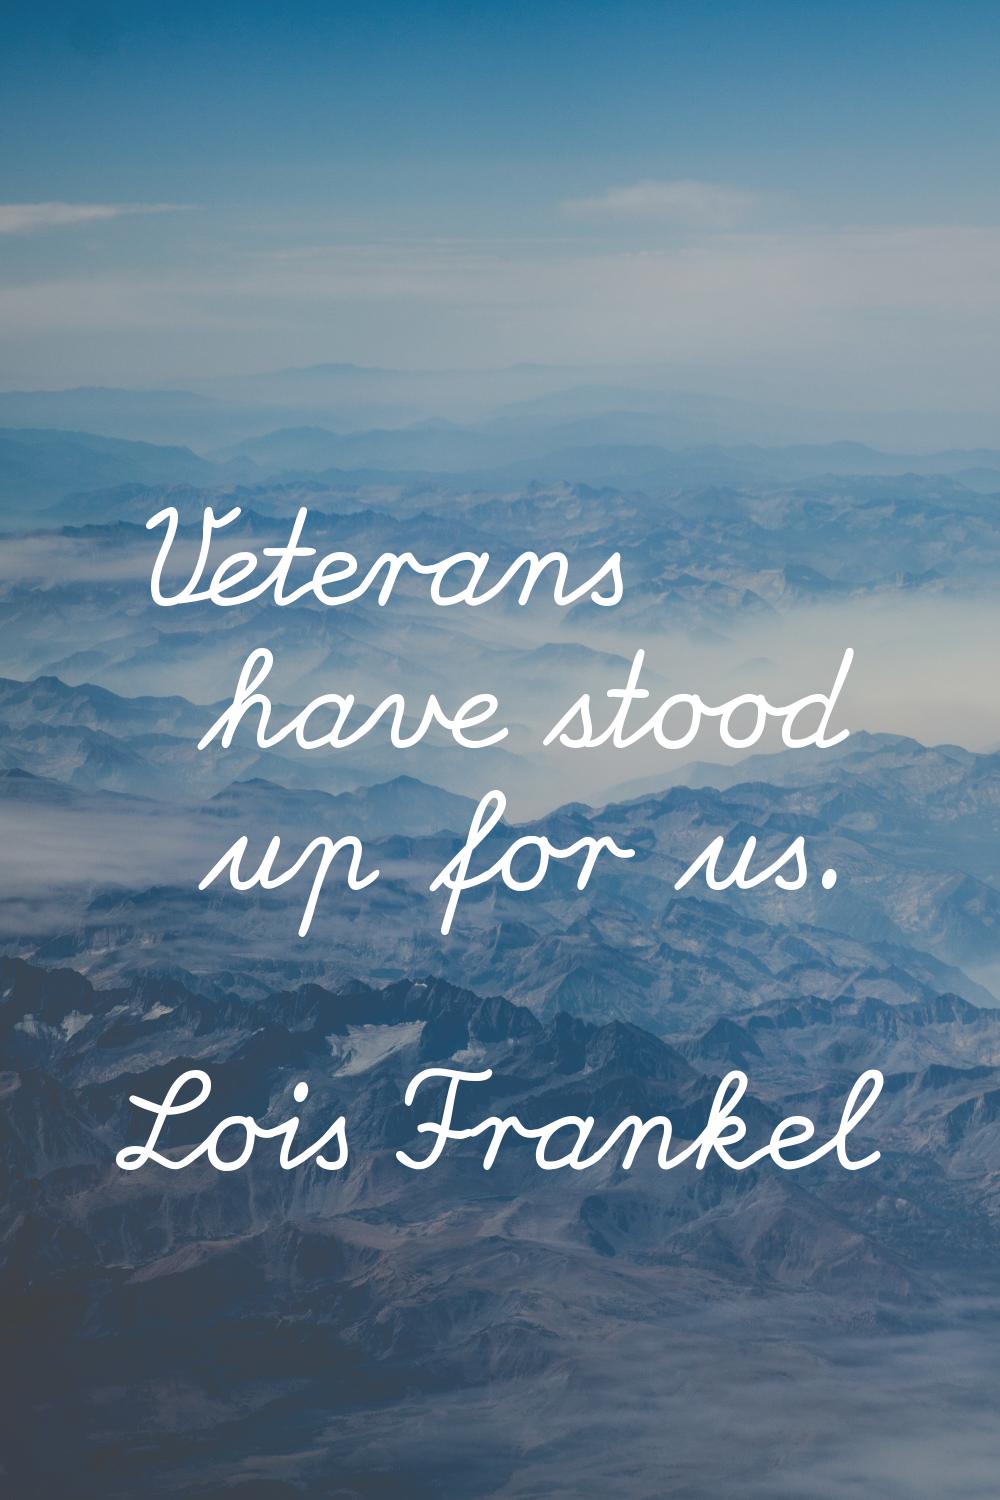 Veterans have stood up for us.